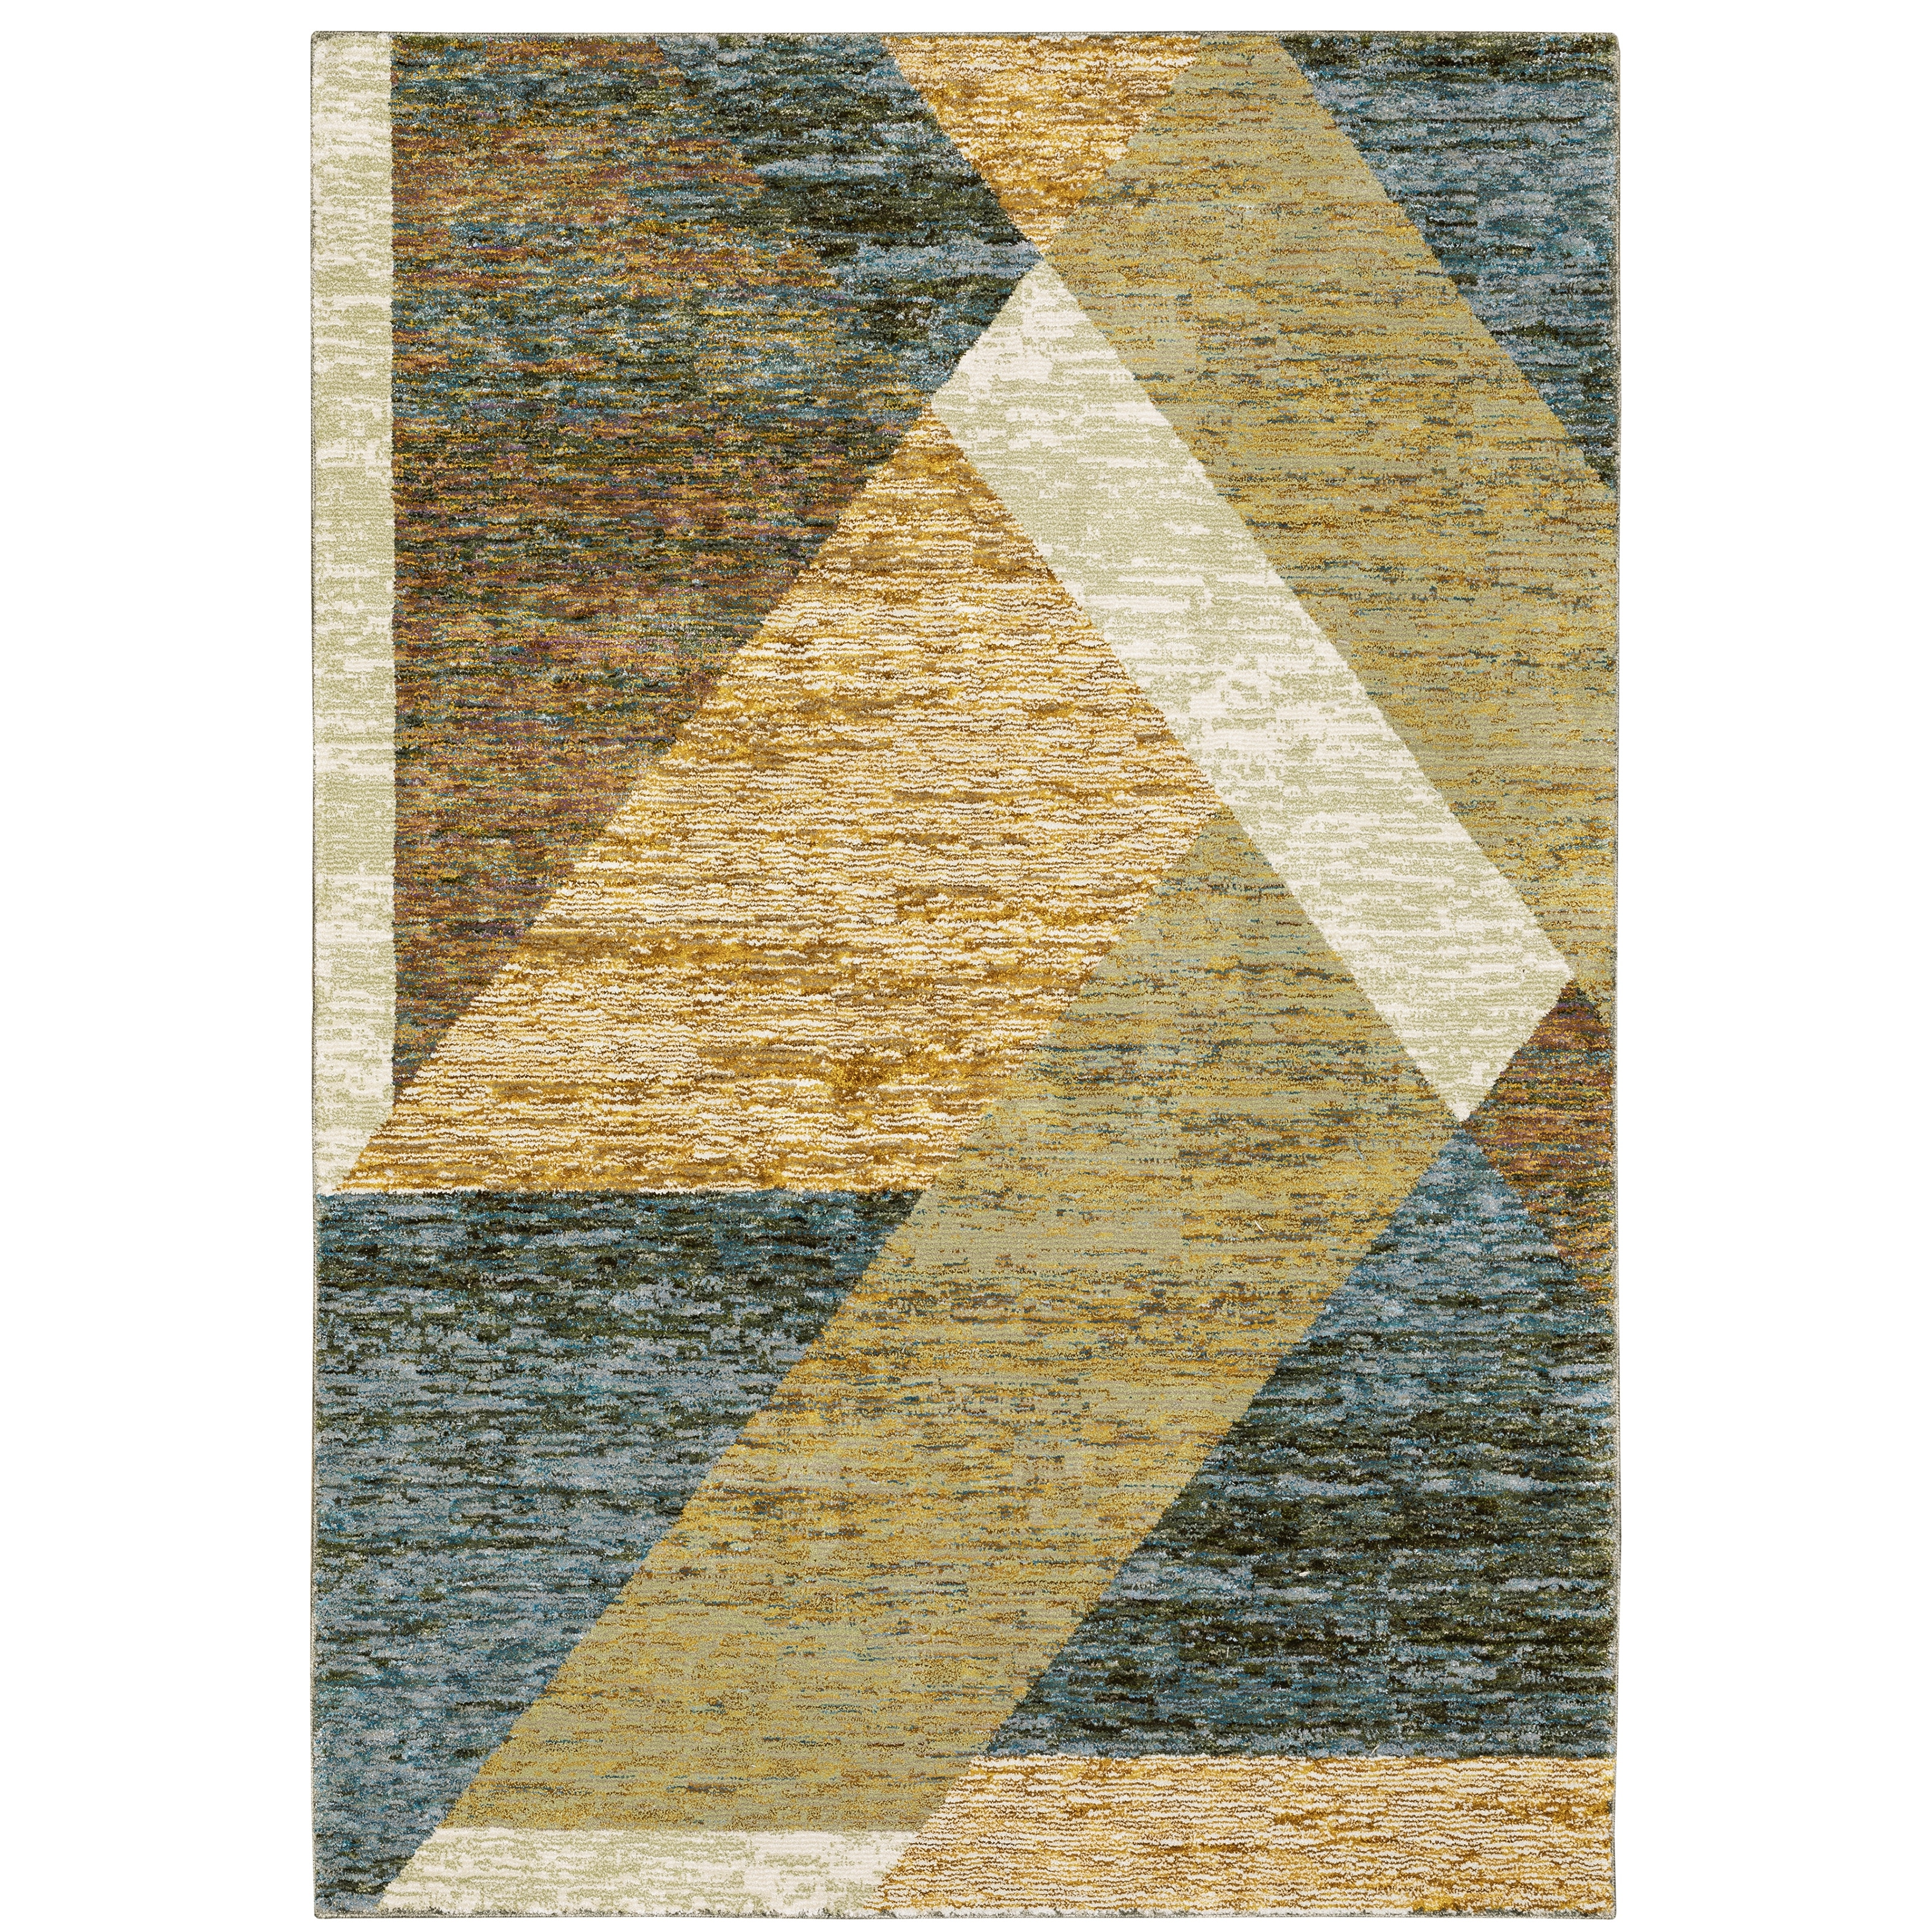 Gold Décor Direct TYBEE Modern Casual Geometric Area Rug 